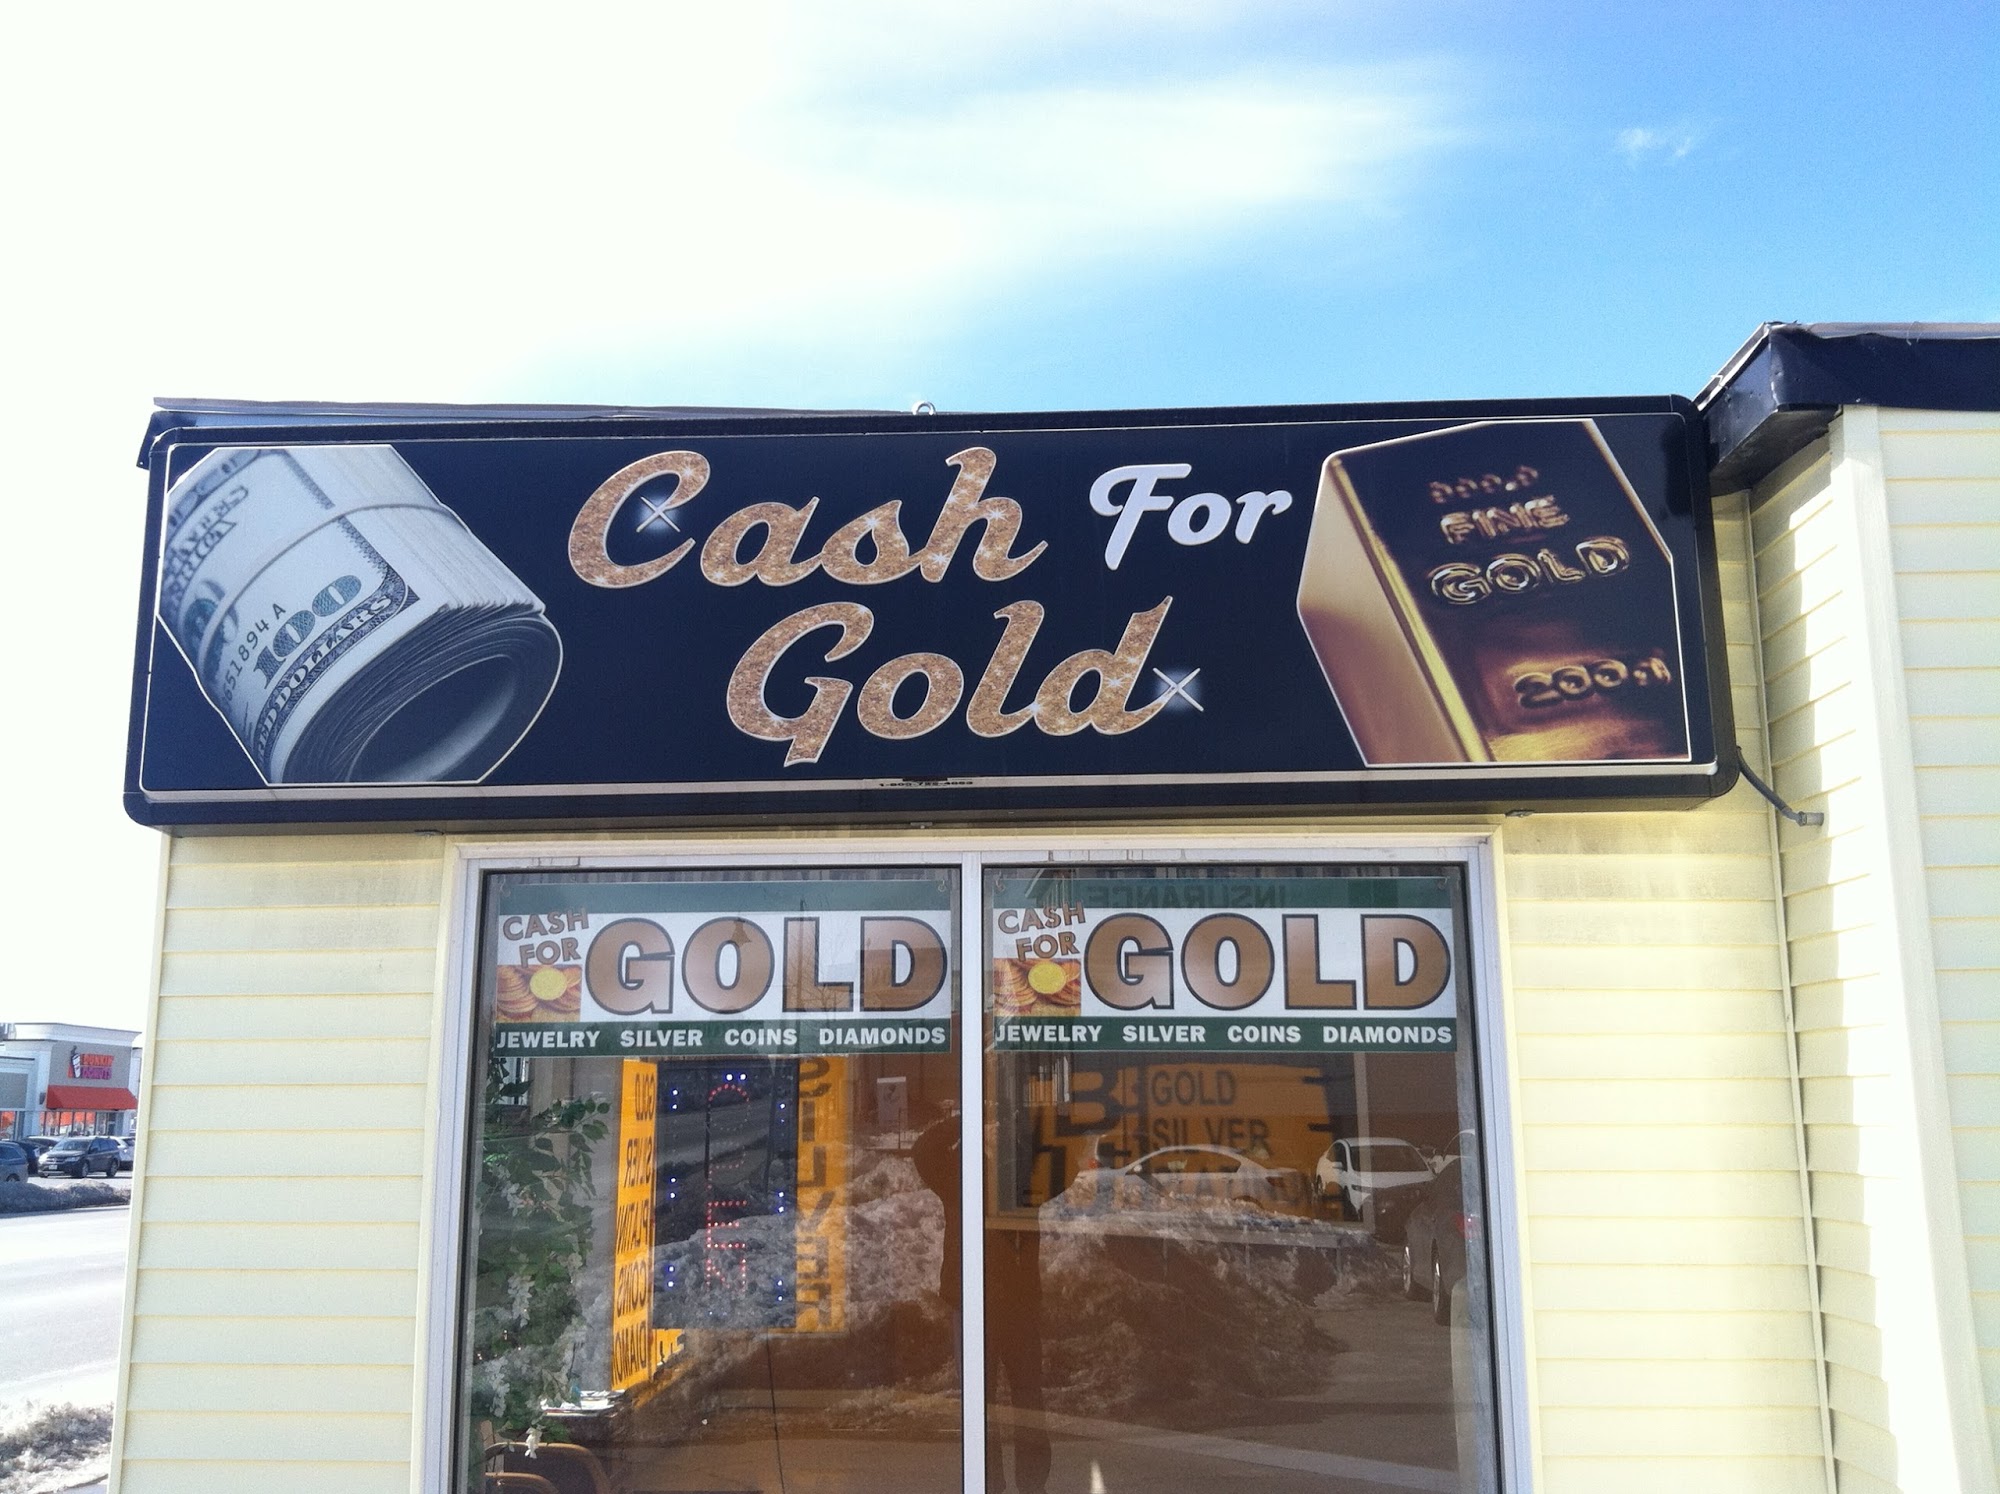 Cash For Gold: Coin and Jewelry